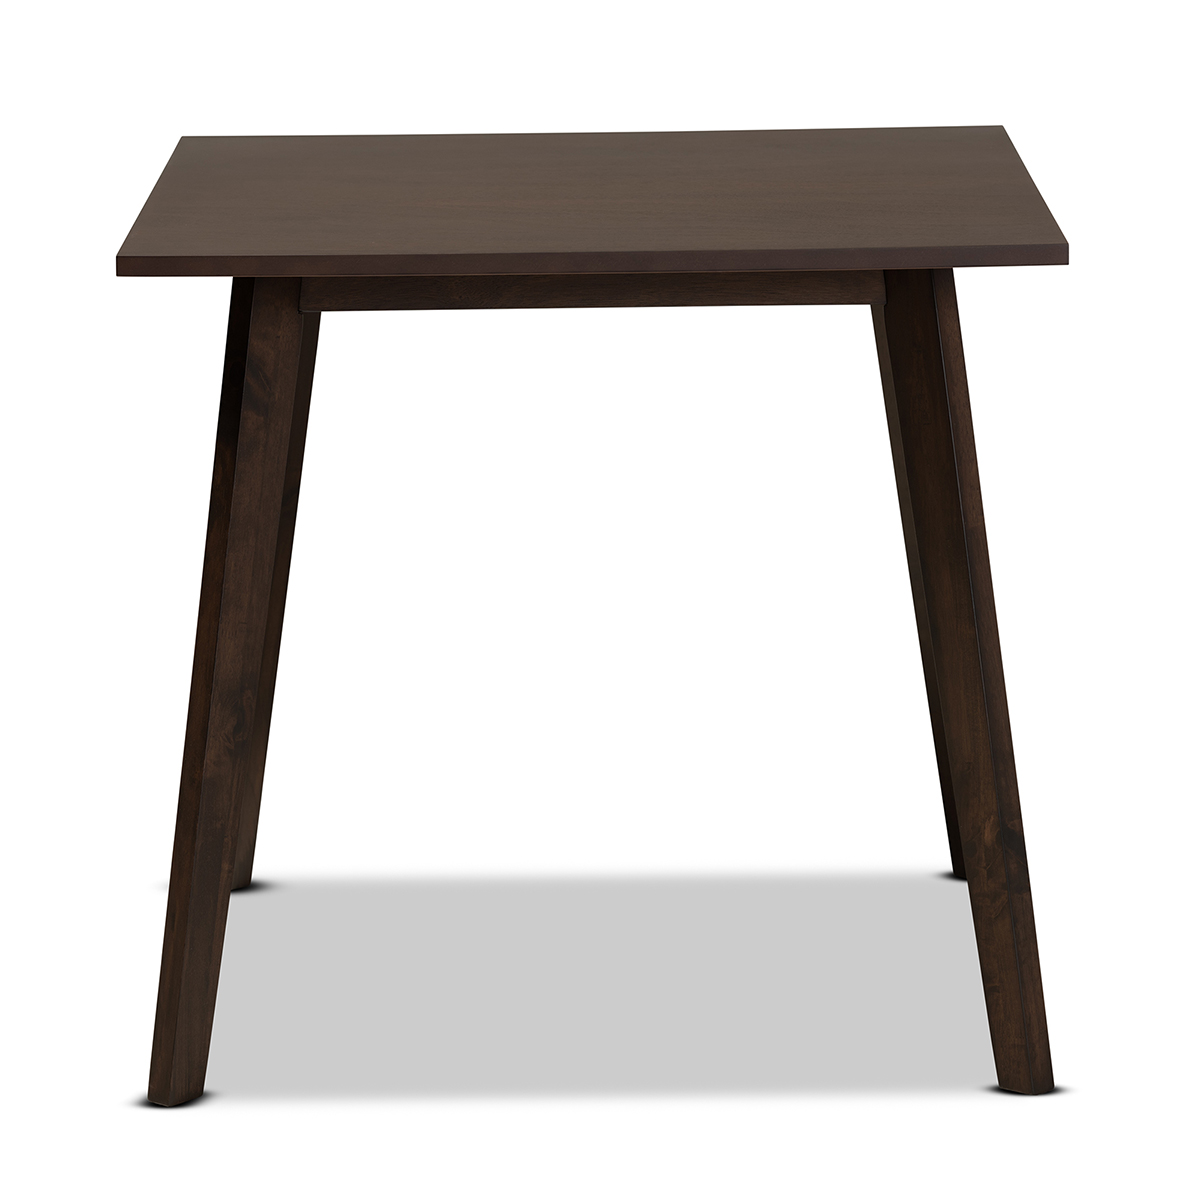 Baxton Studio Britte Mid-Century Square Wood Dining Table